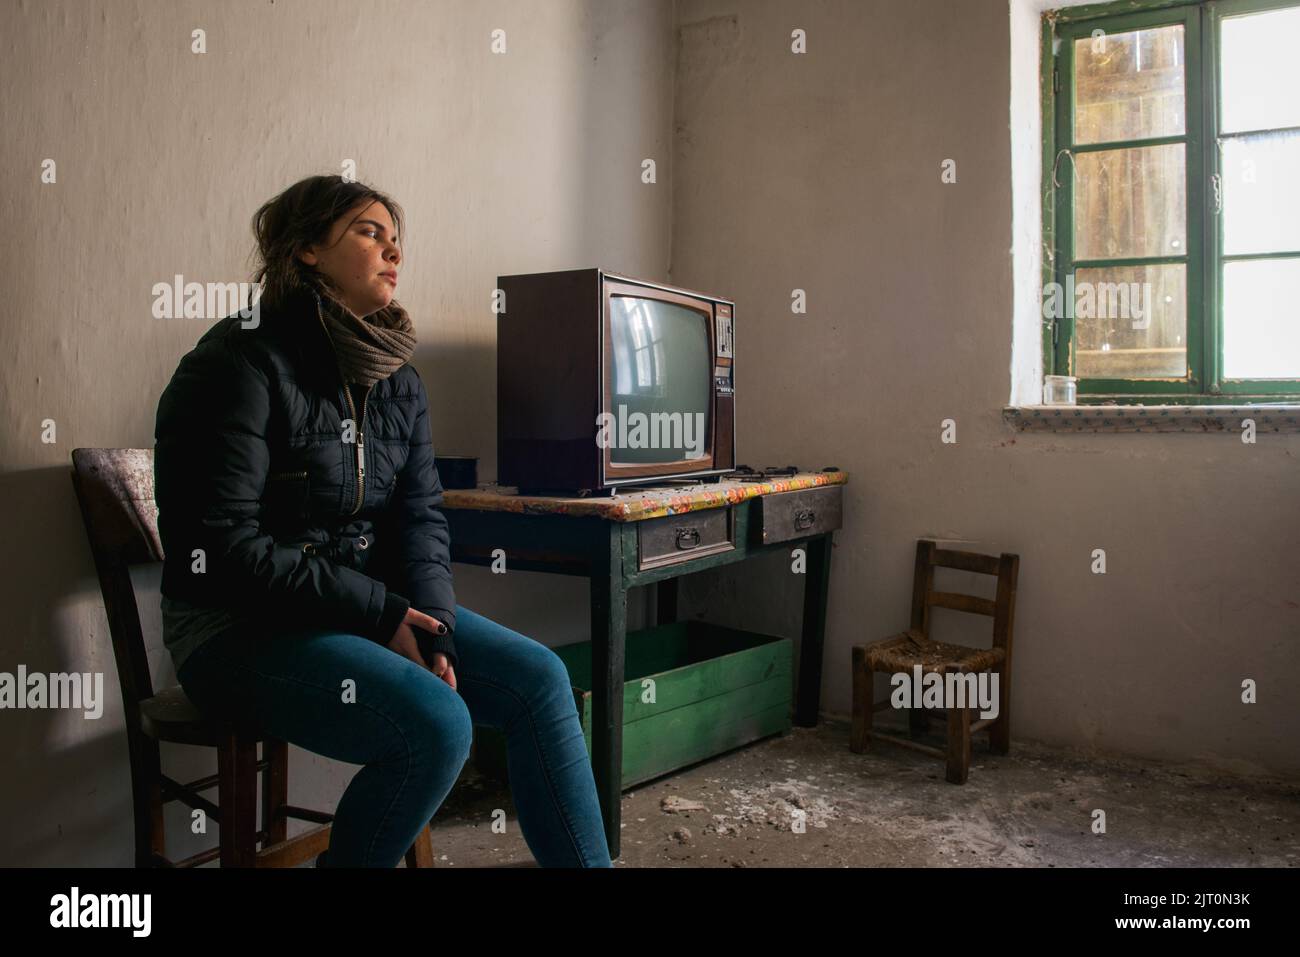 Young woman lonely in an abandoned ruined room with television. Loneliness concept Stock Photo